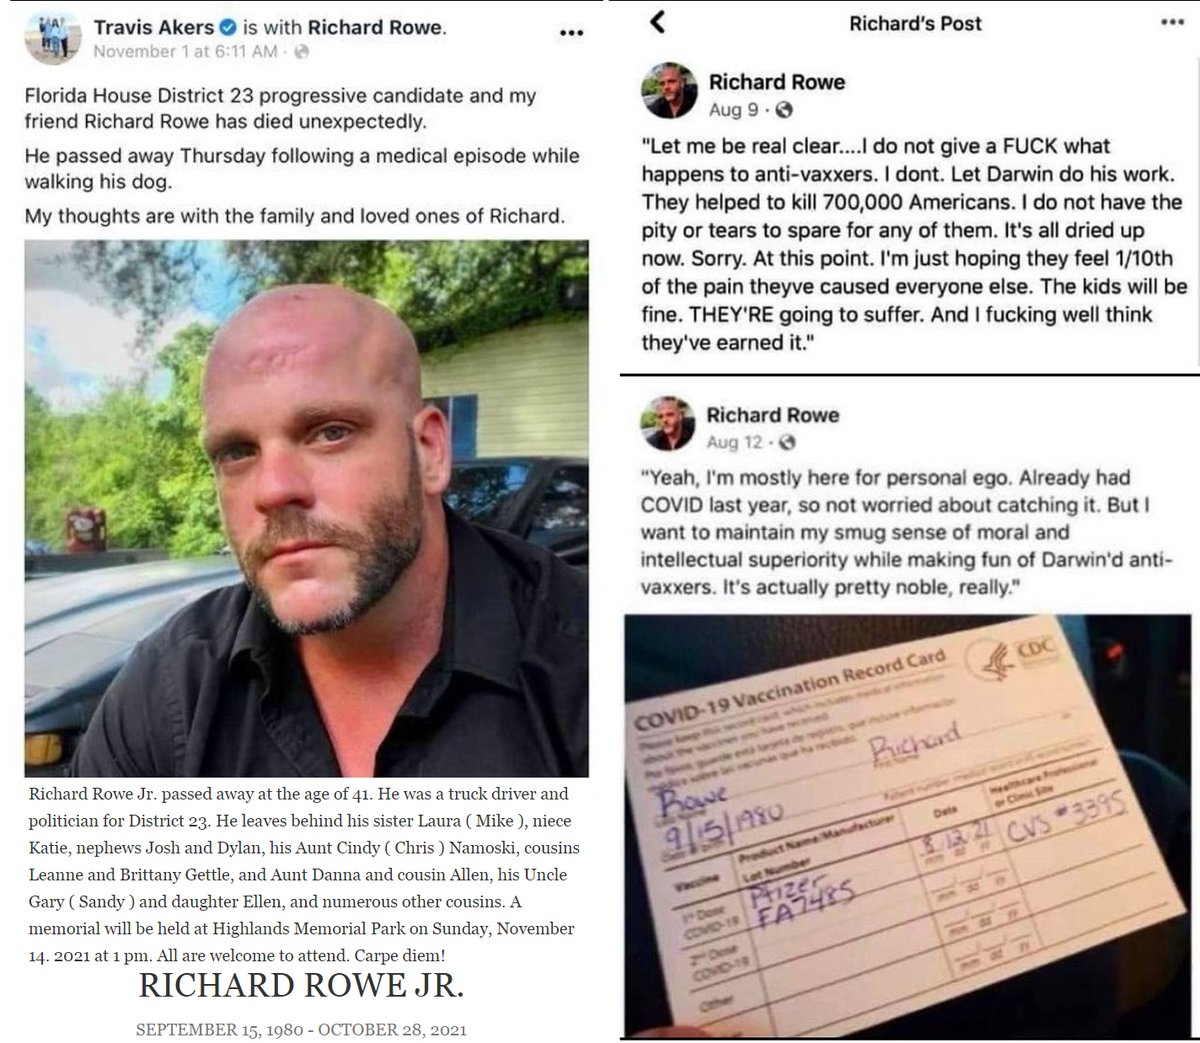 41 year old Richard Rowe, Floride House District 23 progressive candidate, really hated 'anti-vaxxers' Richard died 2 months after taking his 1st Pfizer COVID-19 mRNA Vaccine Lot:FA7485 Aug.9: 'I do not give a F*** what happens to anti-vaxxers. I dont. Let Darwin do his work'